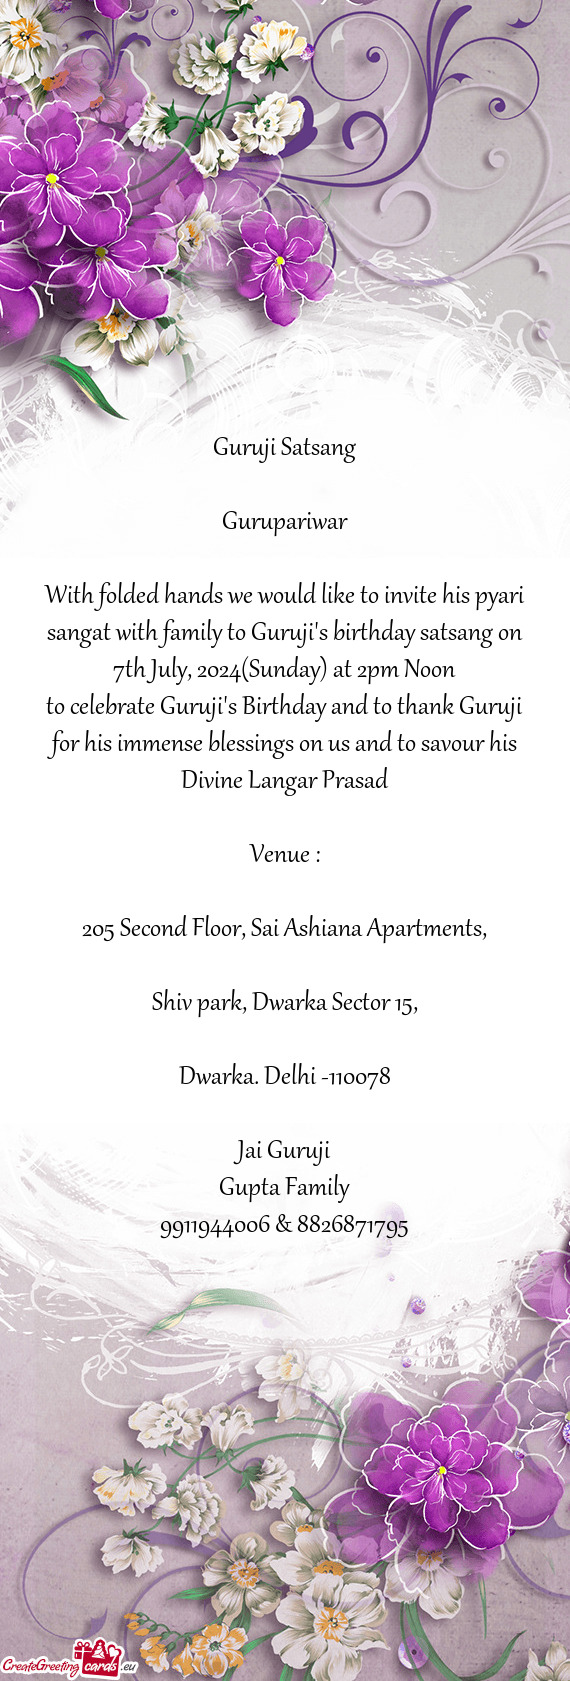 With folded hands we would like to invite his pyari sangat with family to Guruji